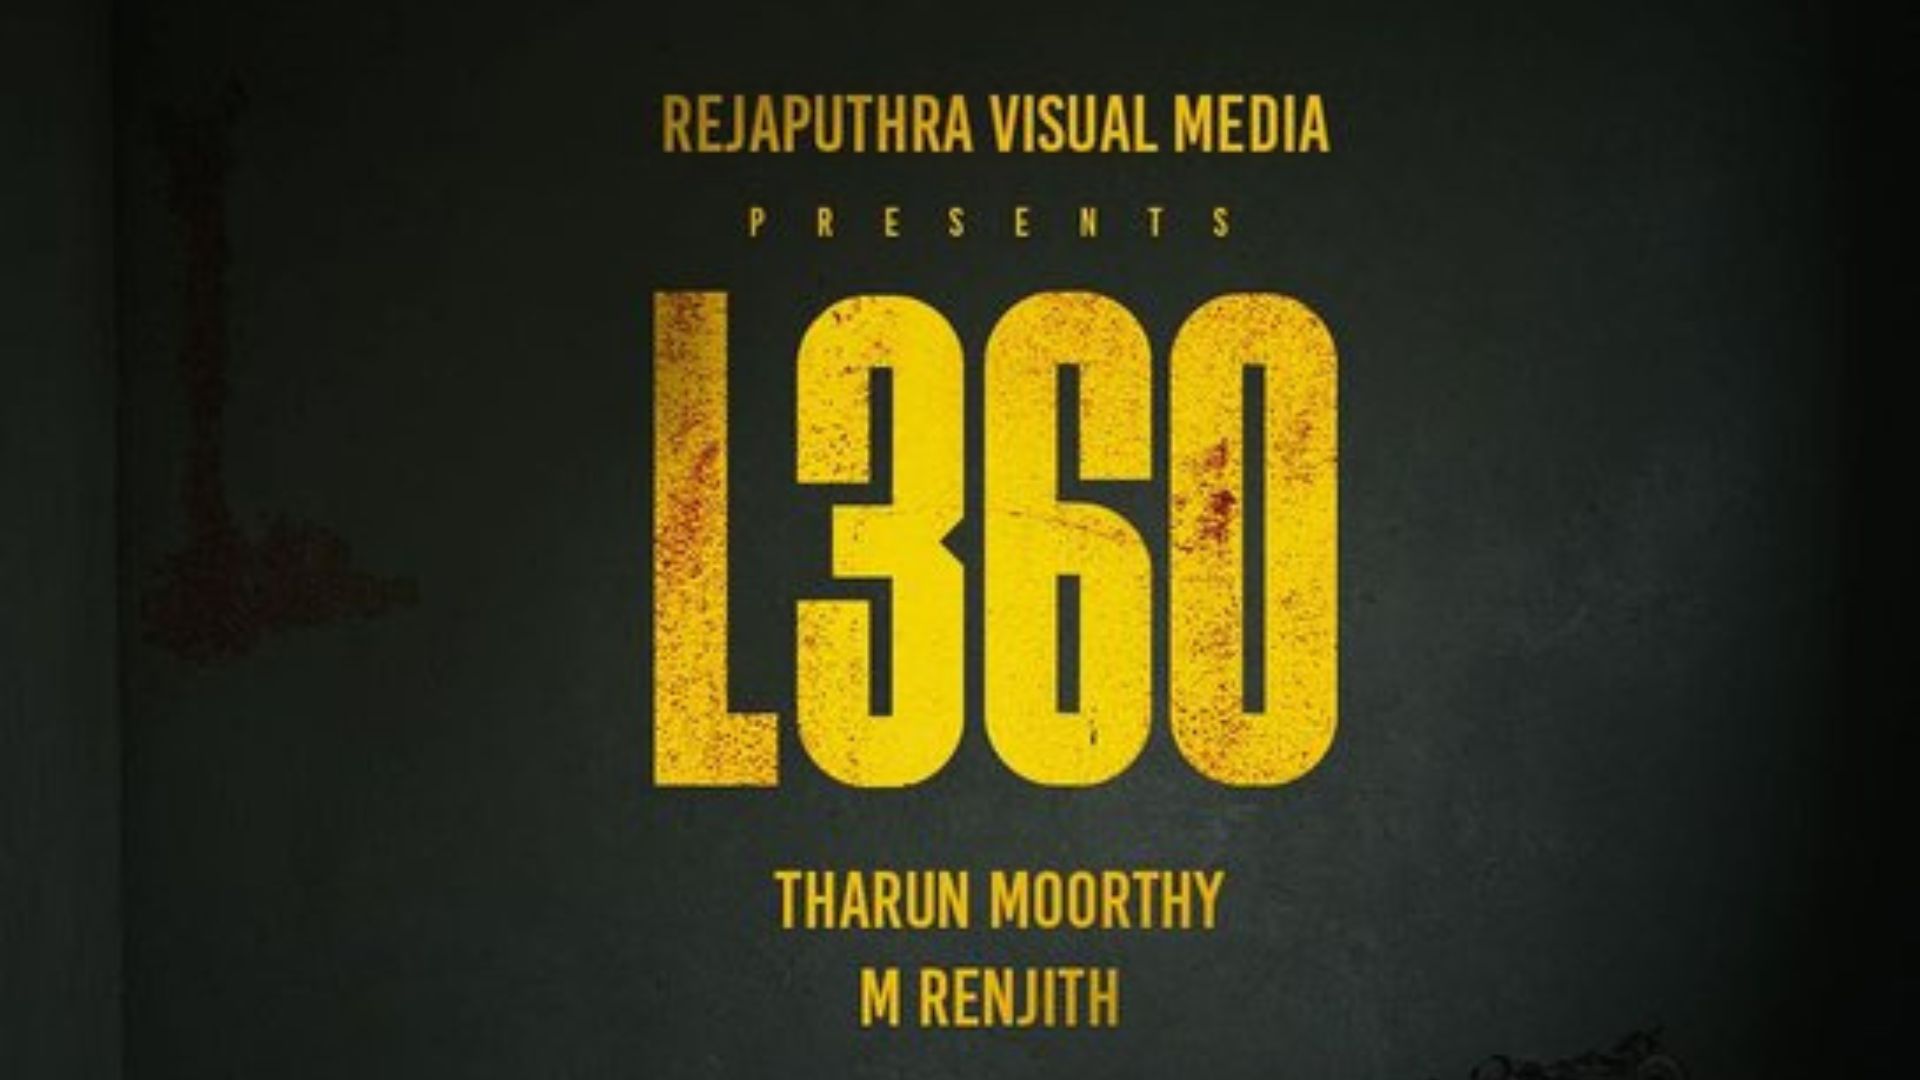 The Mohanlal L360 film has been revealed